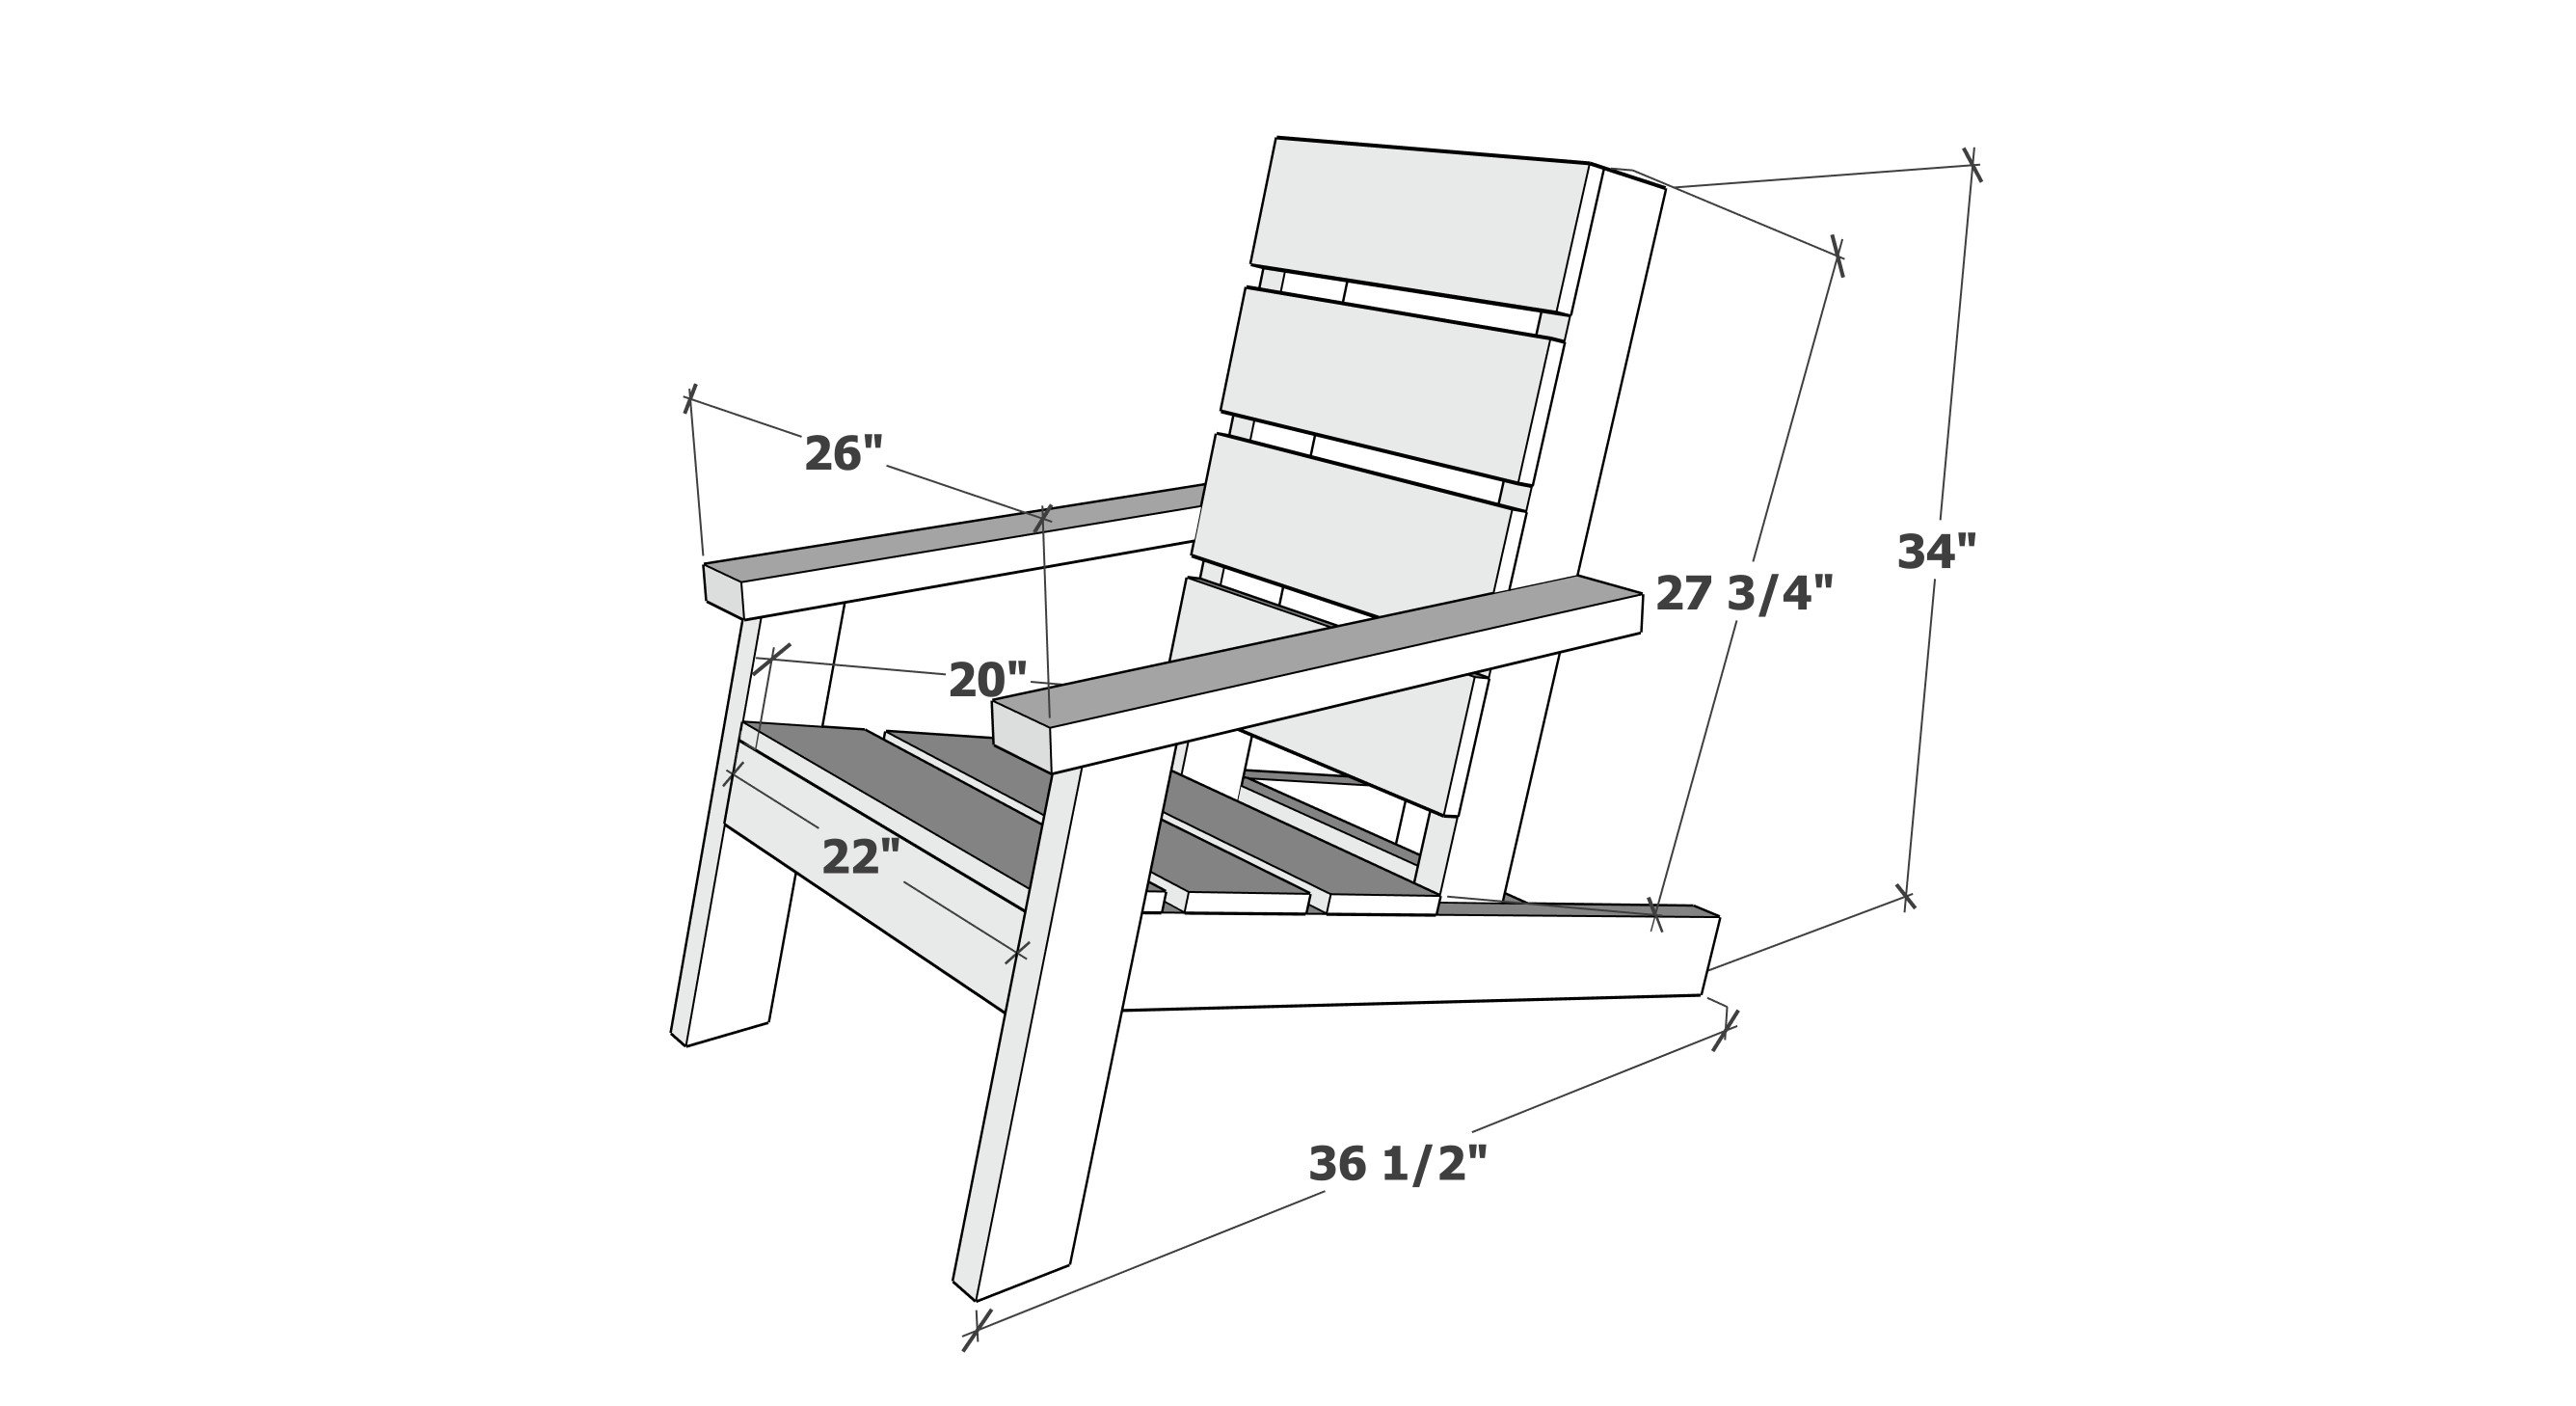 dimensions for Adirondack chair